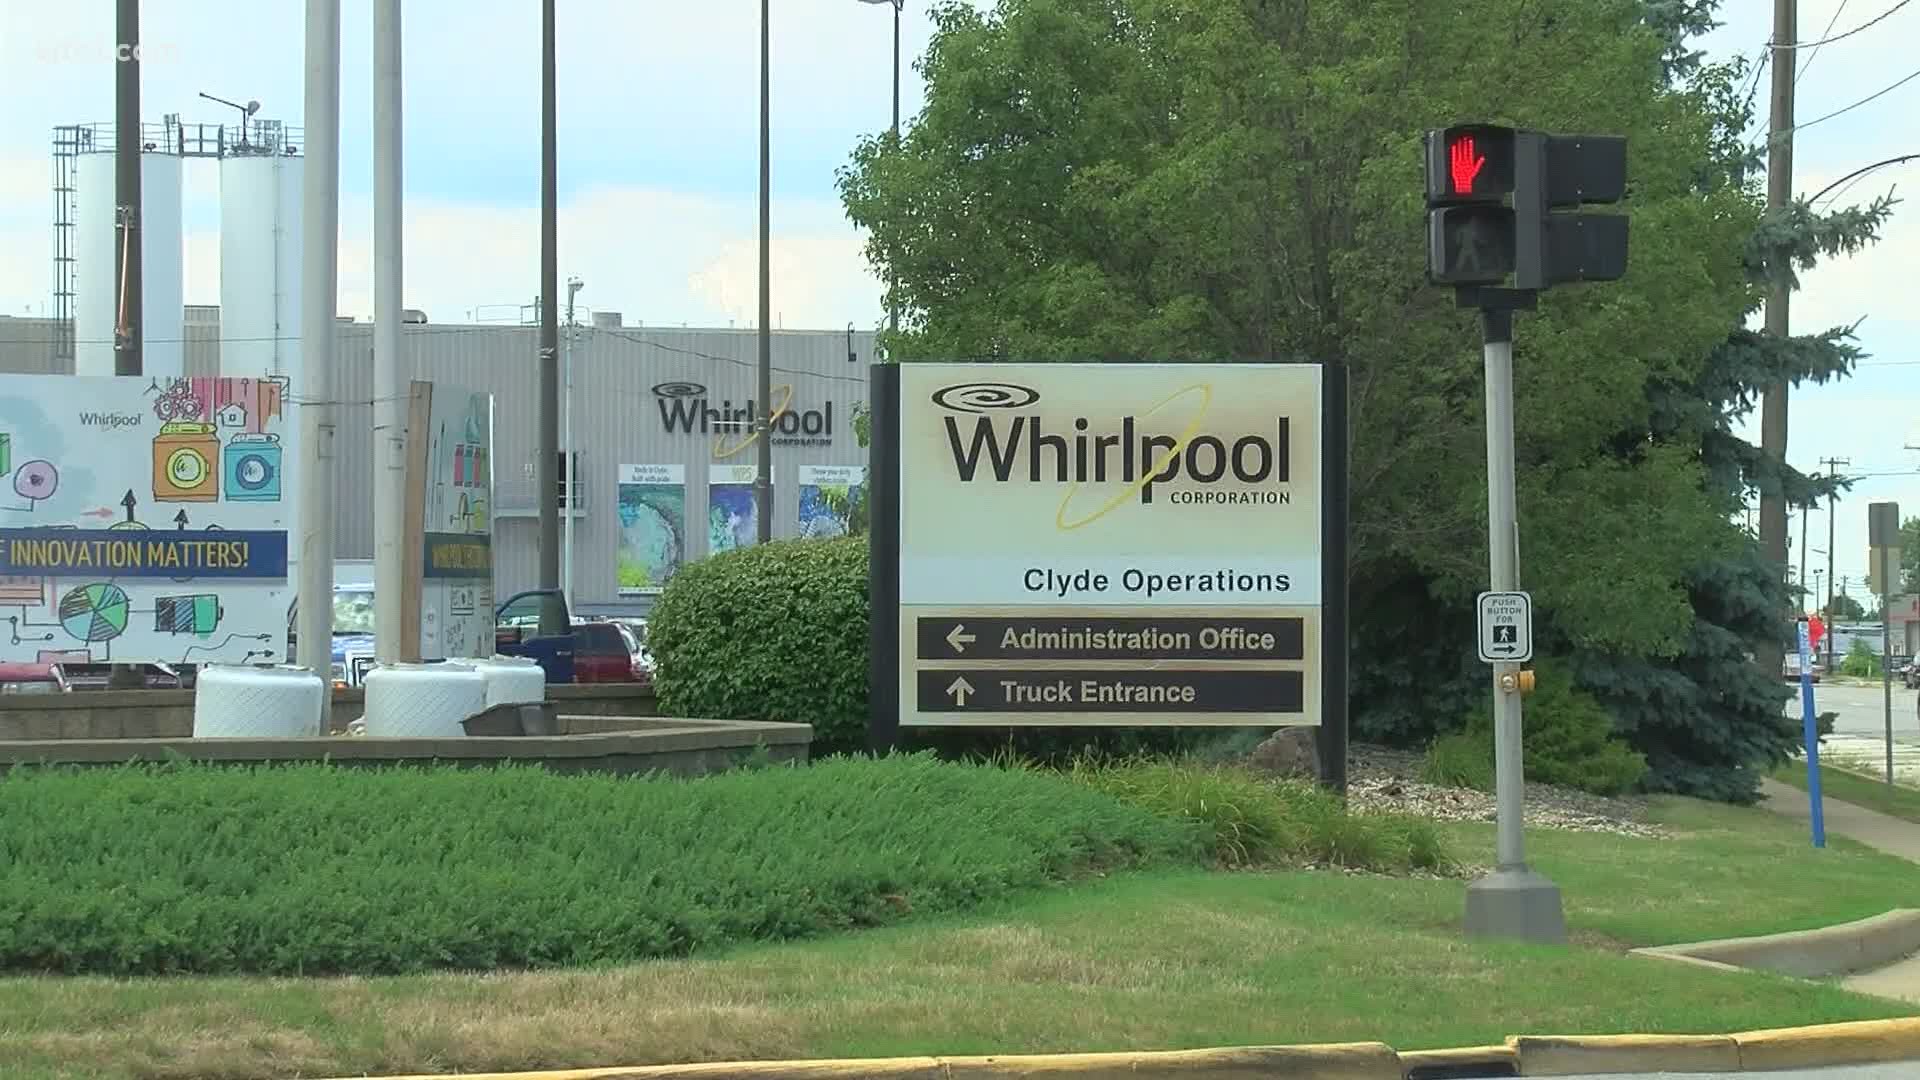 President Trump is expected to take a tour of Clyde's Whirlpool plant and share ideas about revitalizing the country's manufacturing industry.